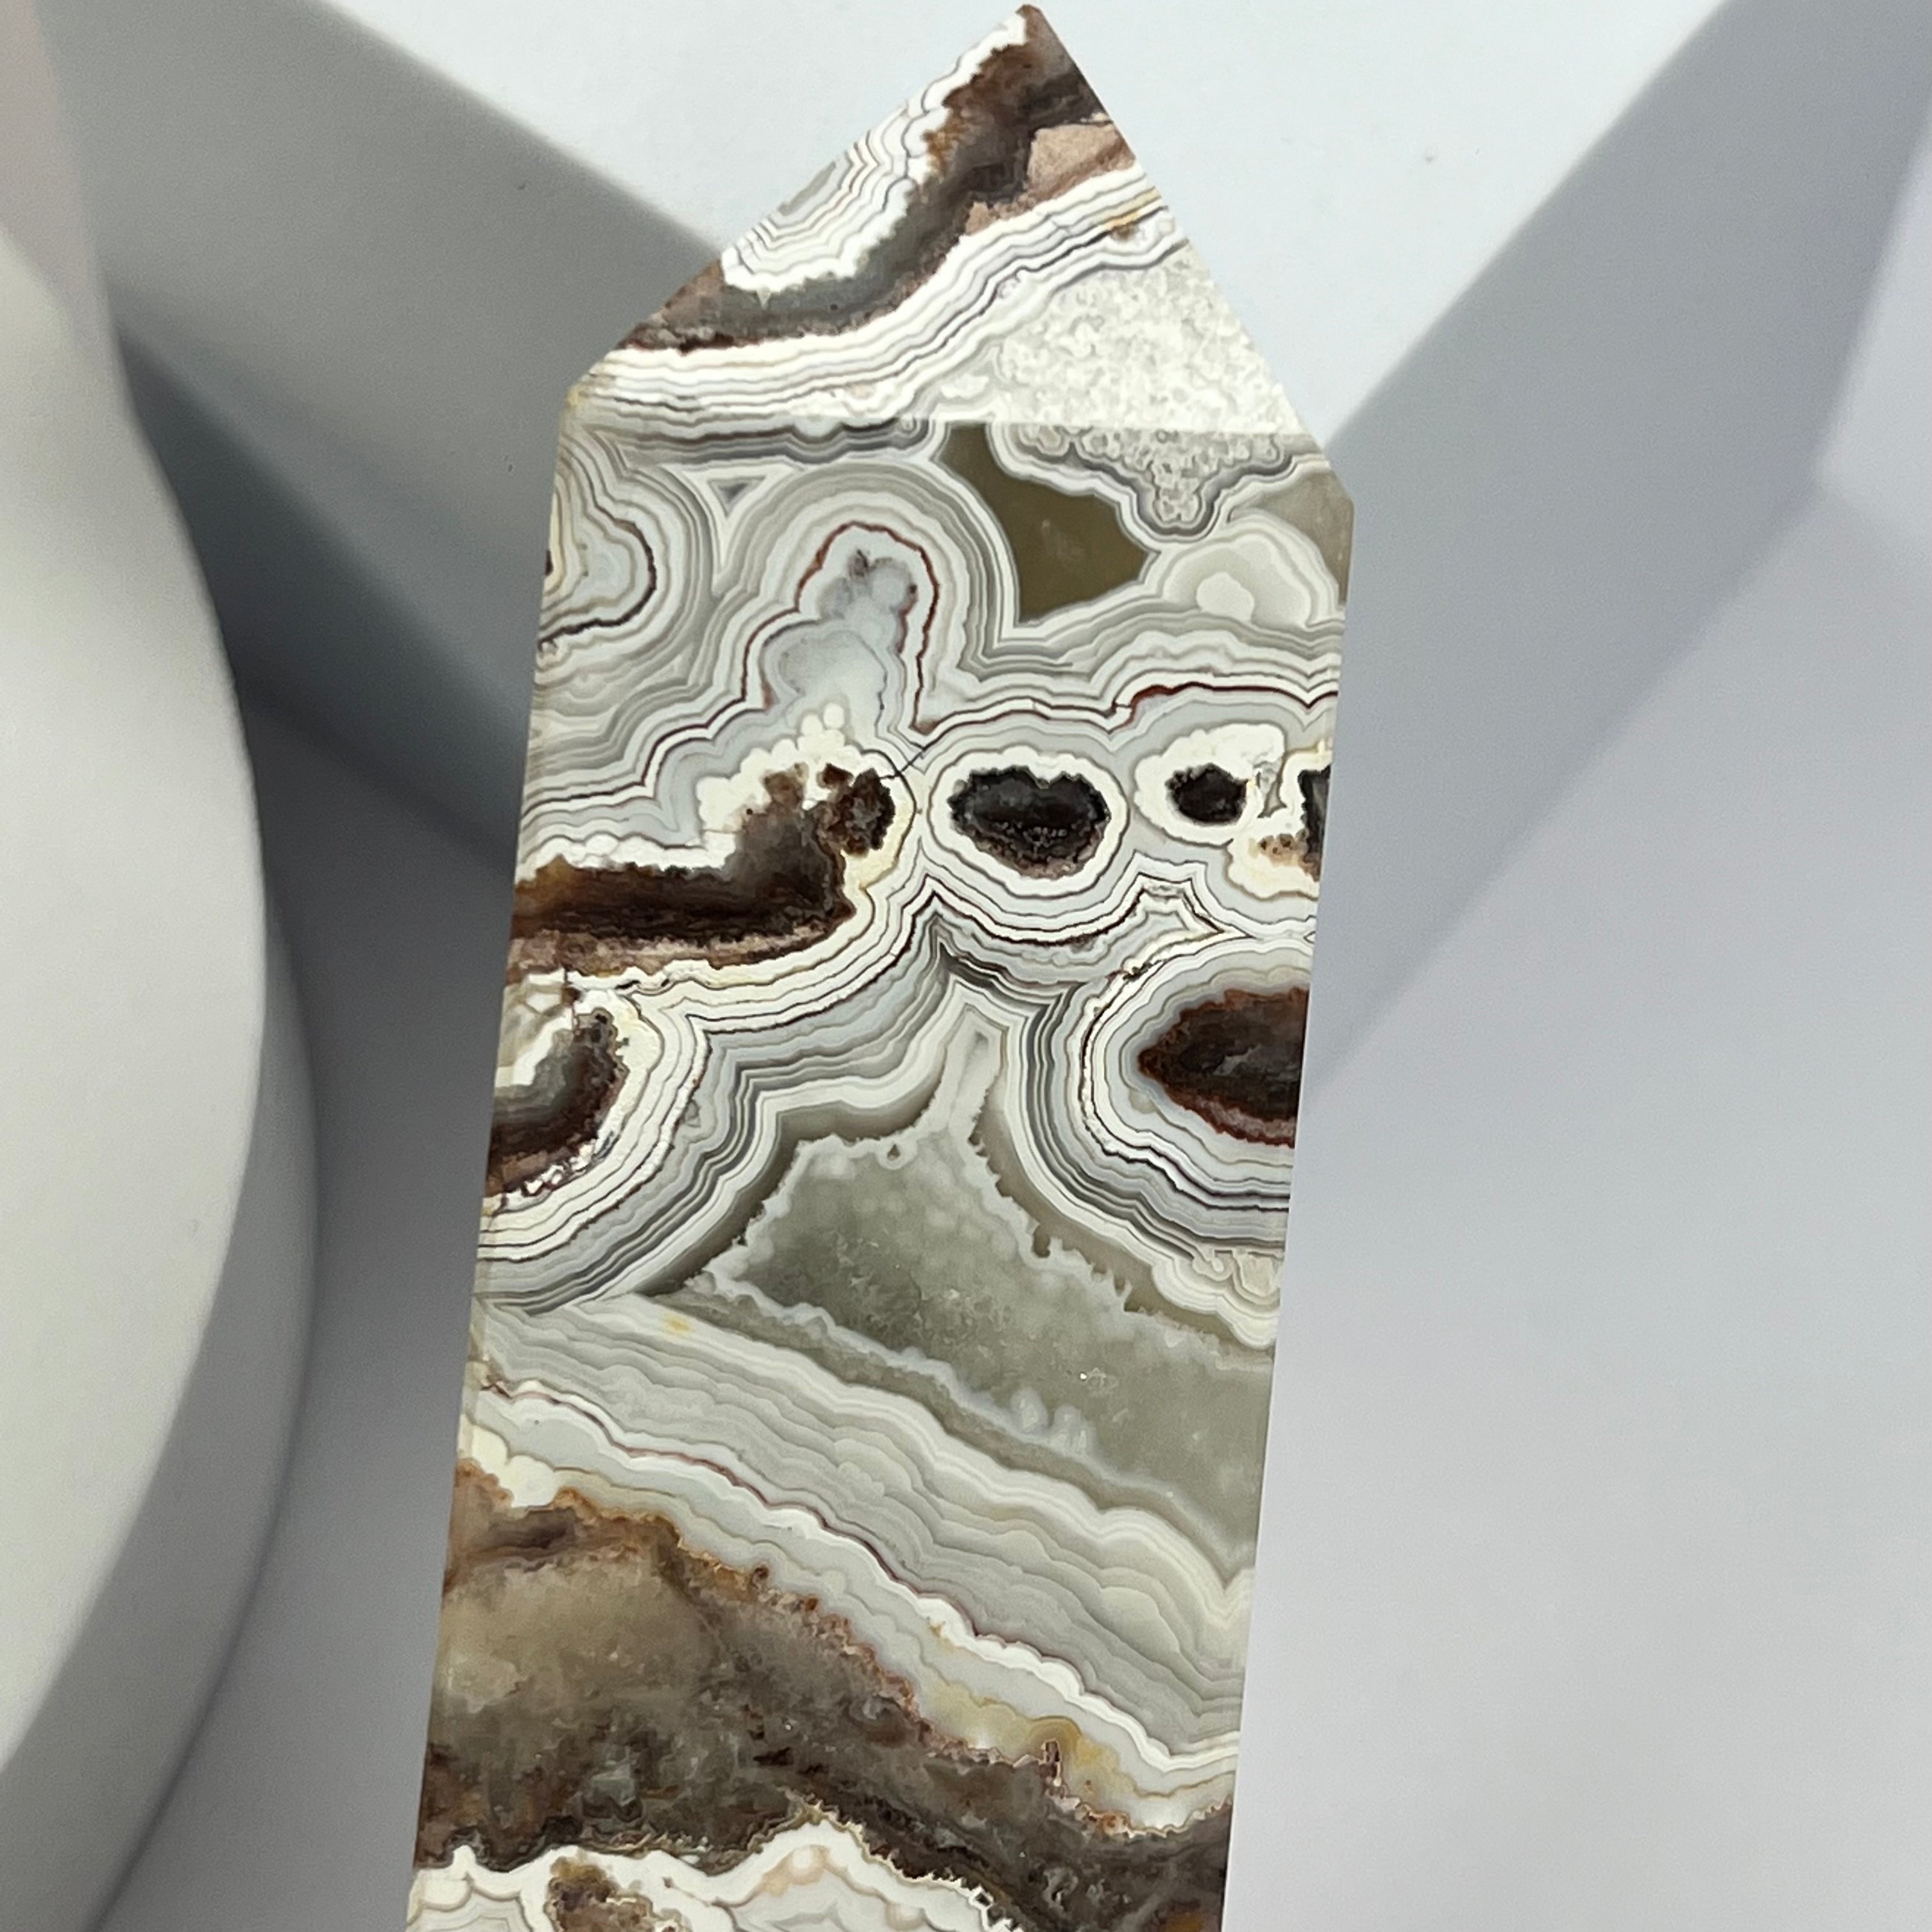 Crazy Lace Agate, also known as Mexican Agate